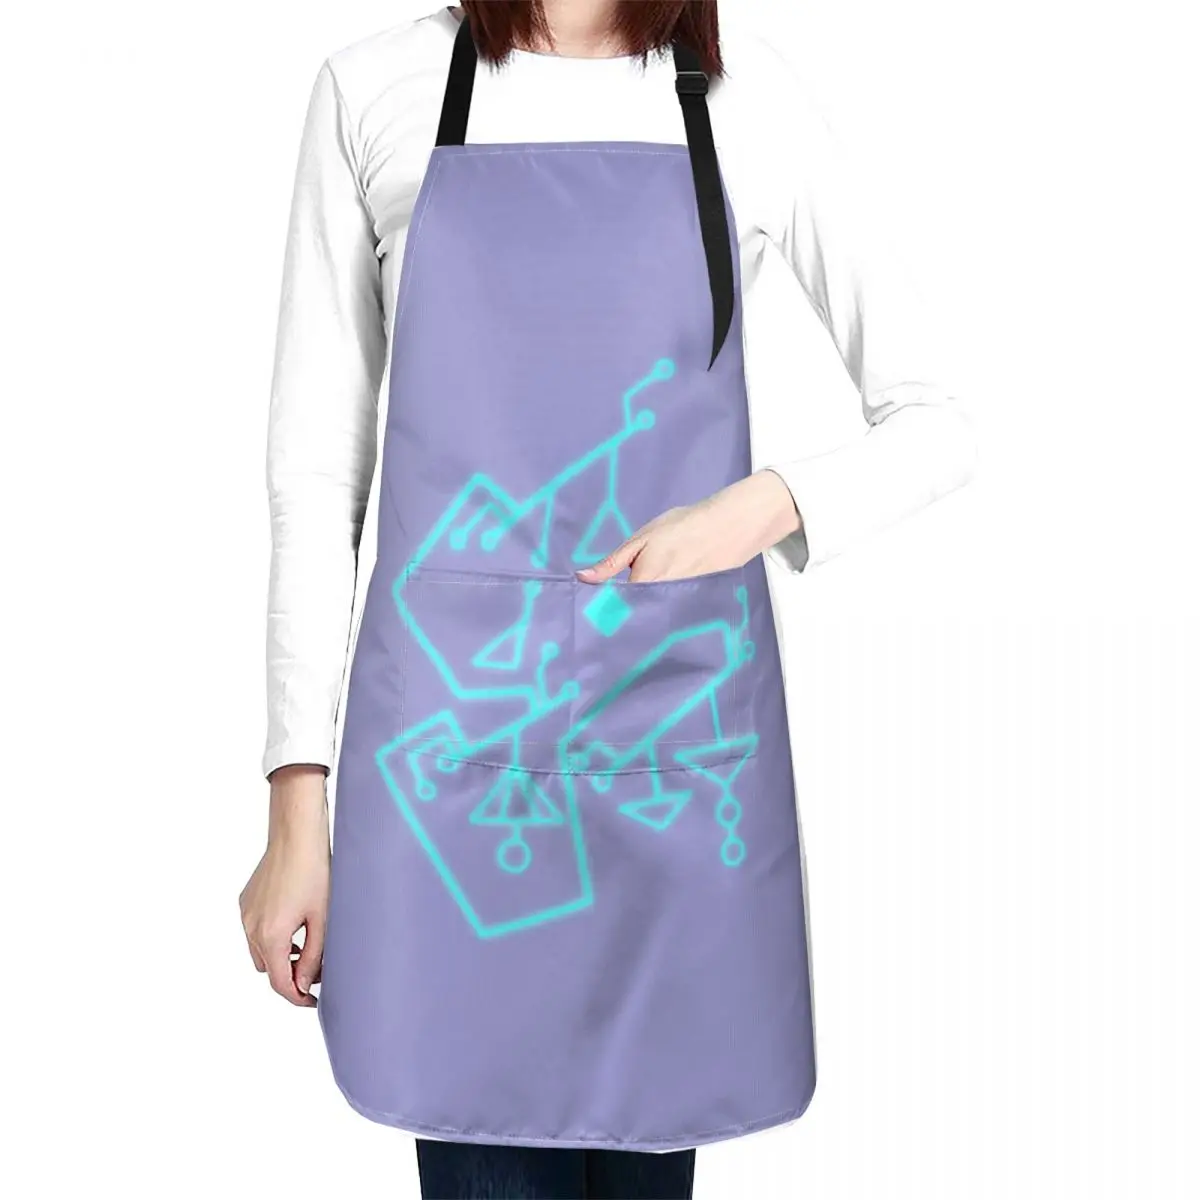 

She Ra Smooch the Chef Apron Things For Home And Kitchen christmas kitchen cloths Christmas gift